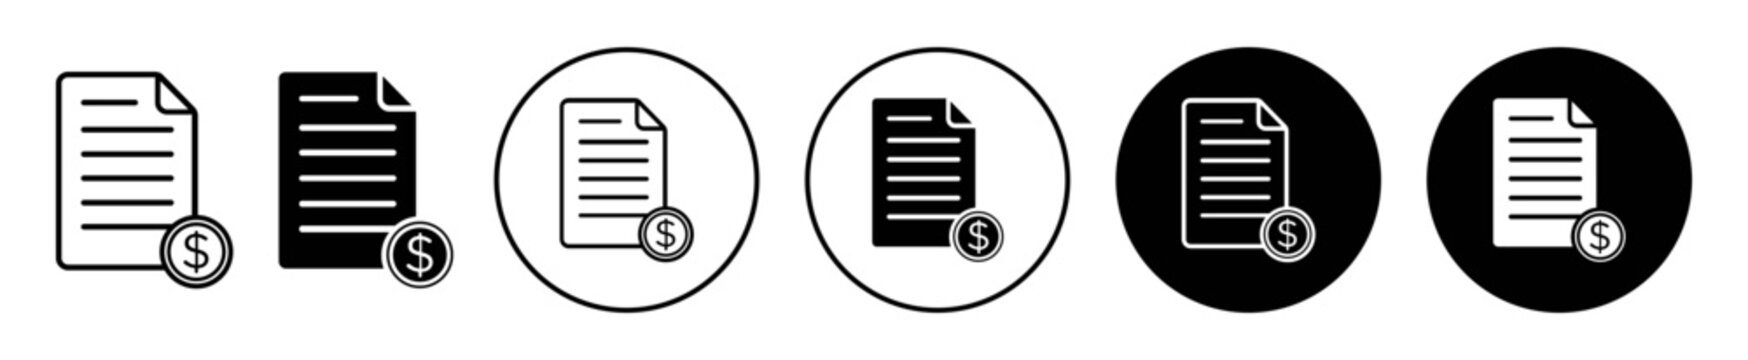 Bonds icon set. stock market treasury bond vector symbol. equity or corporate bonds sign in black filled and outlined style.